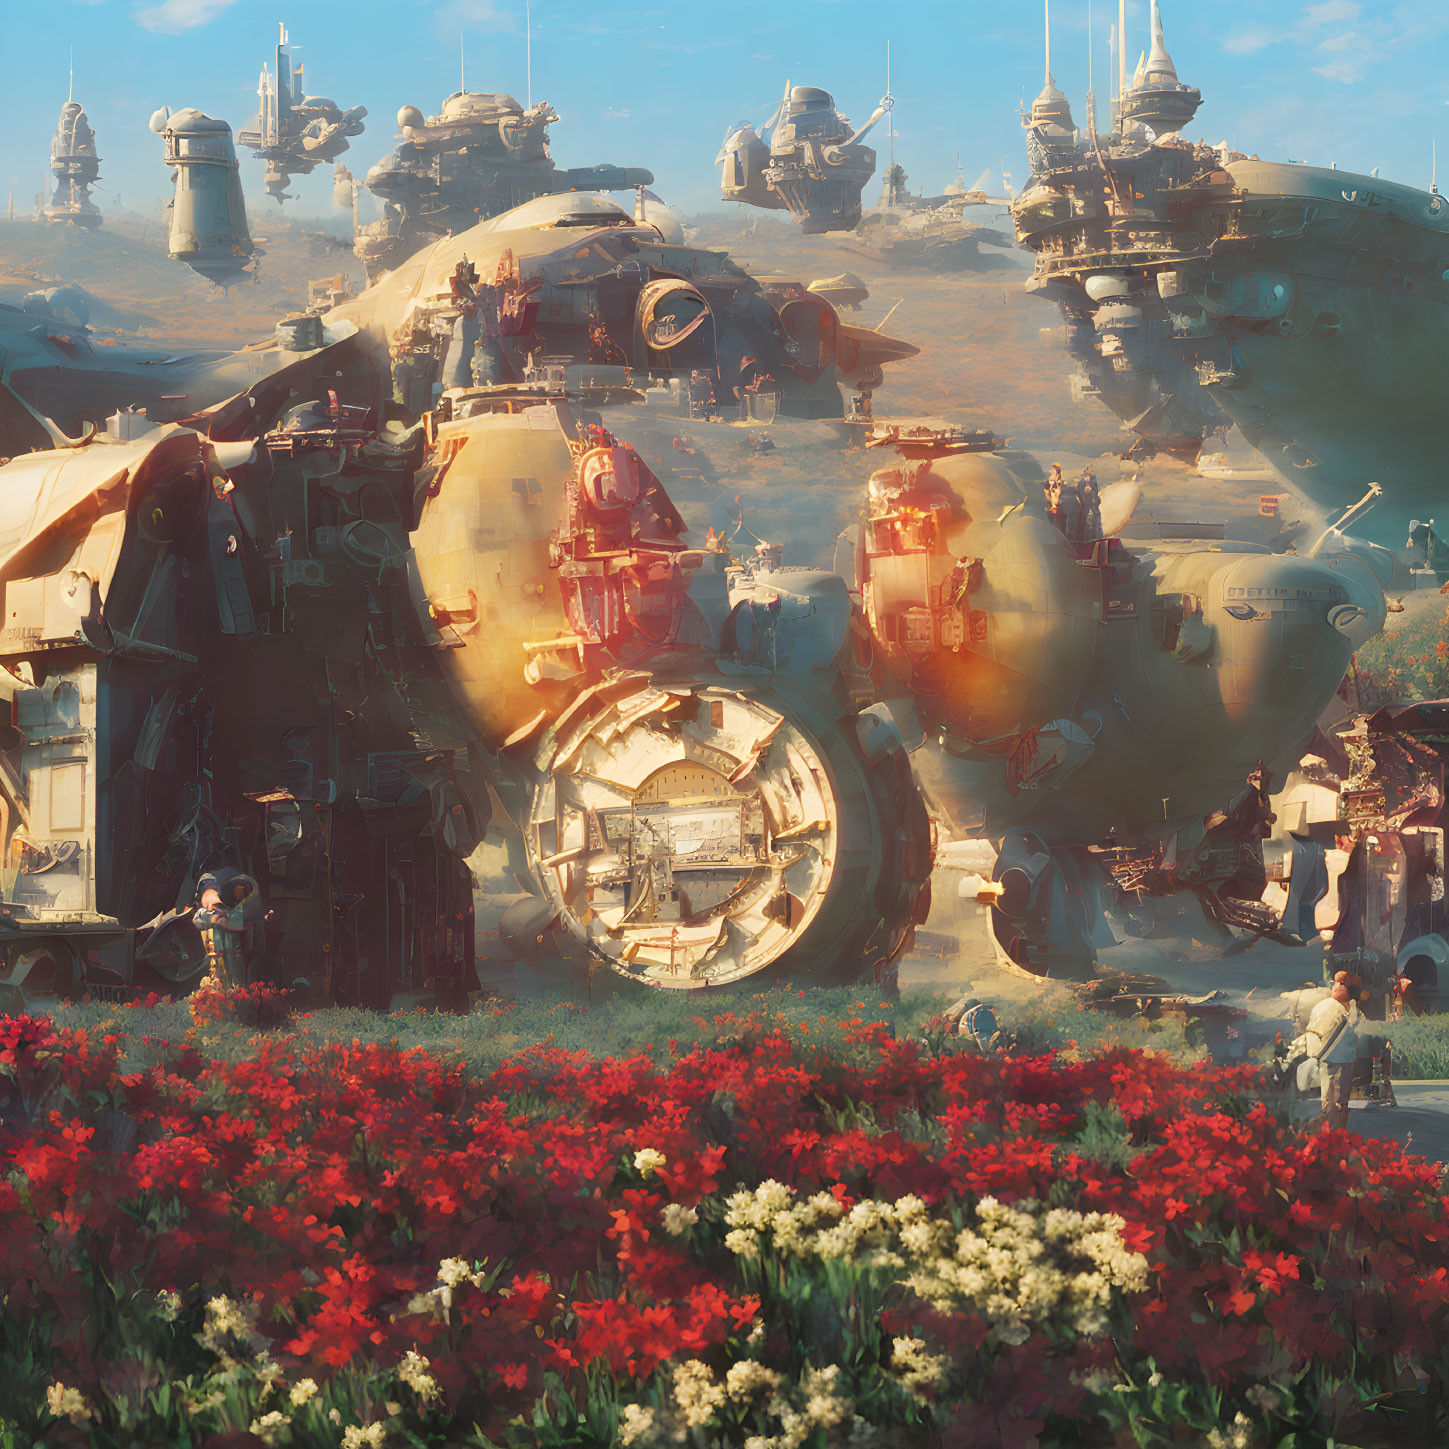 Rusted robots in sci-fi landscape with red flowers and explorers